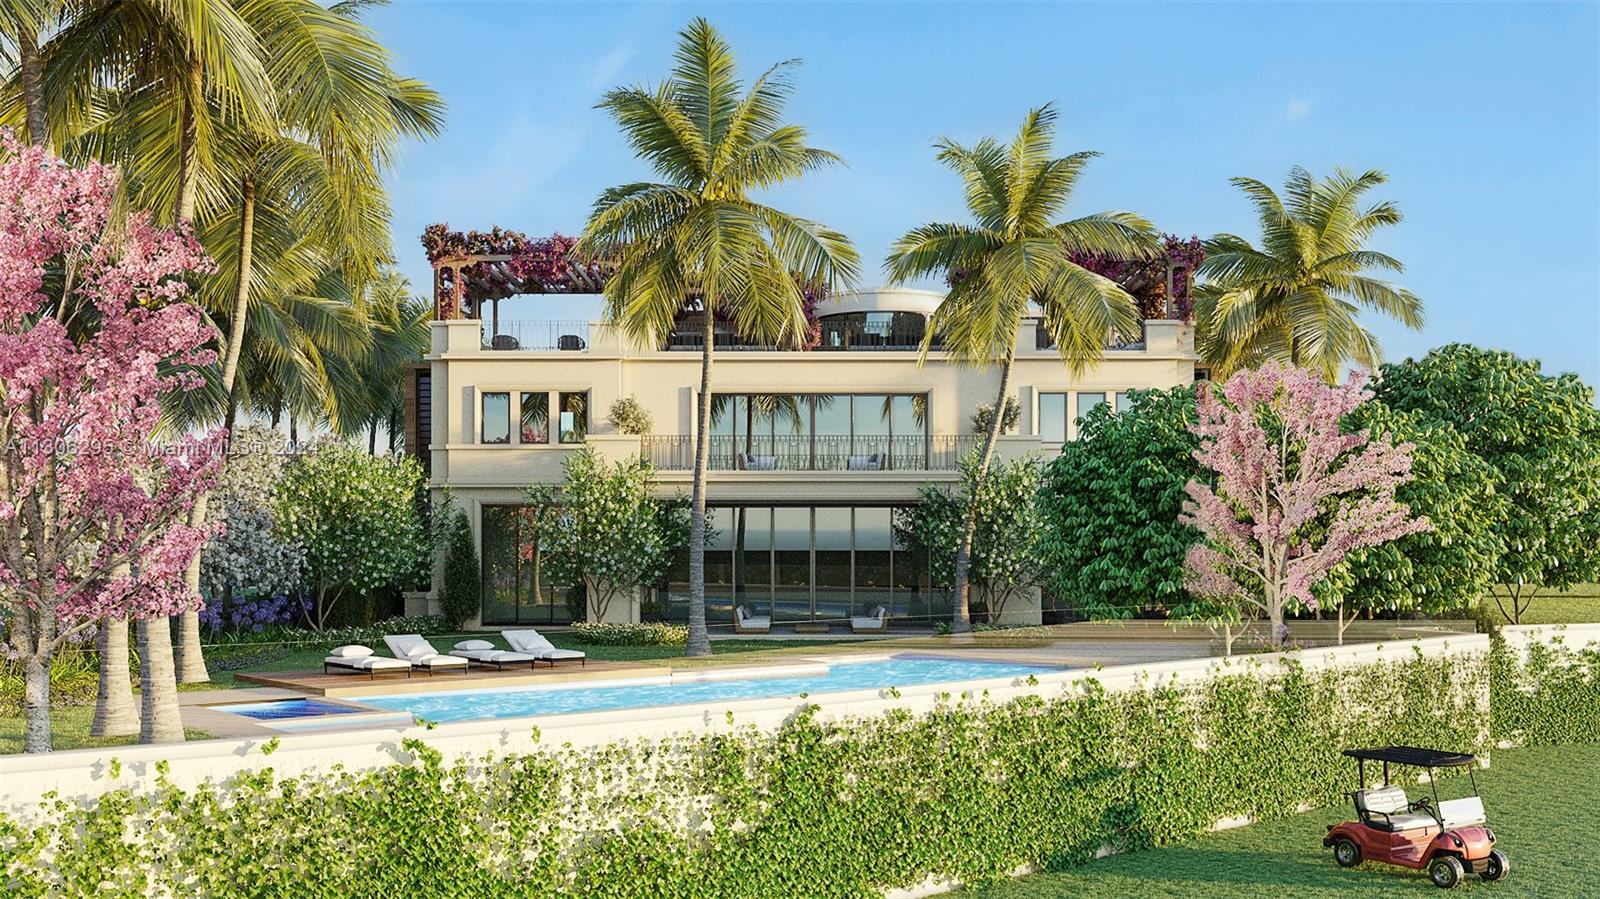 1005 Fisher Island Drive, Fisher Island, Miami-Dade County, Florida - 6 Bedrooms  
7.5 Bathrooms - 